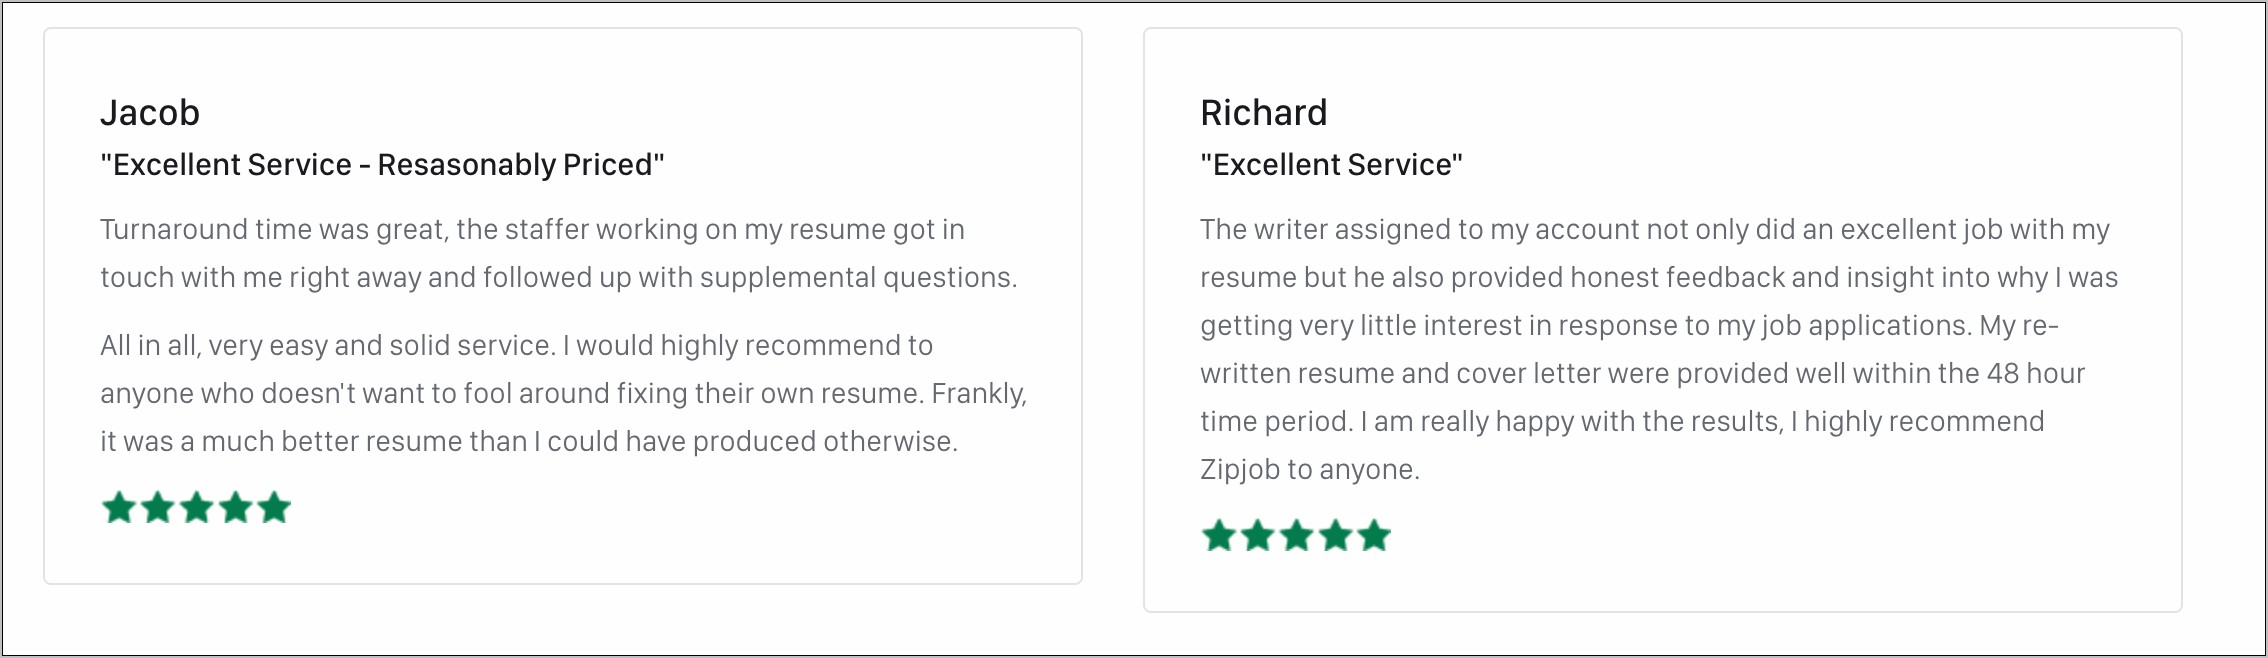 Are Free Resume Reviews Bots